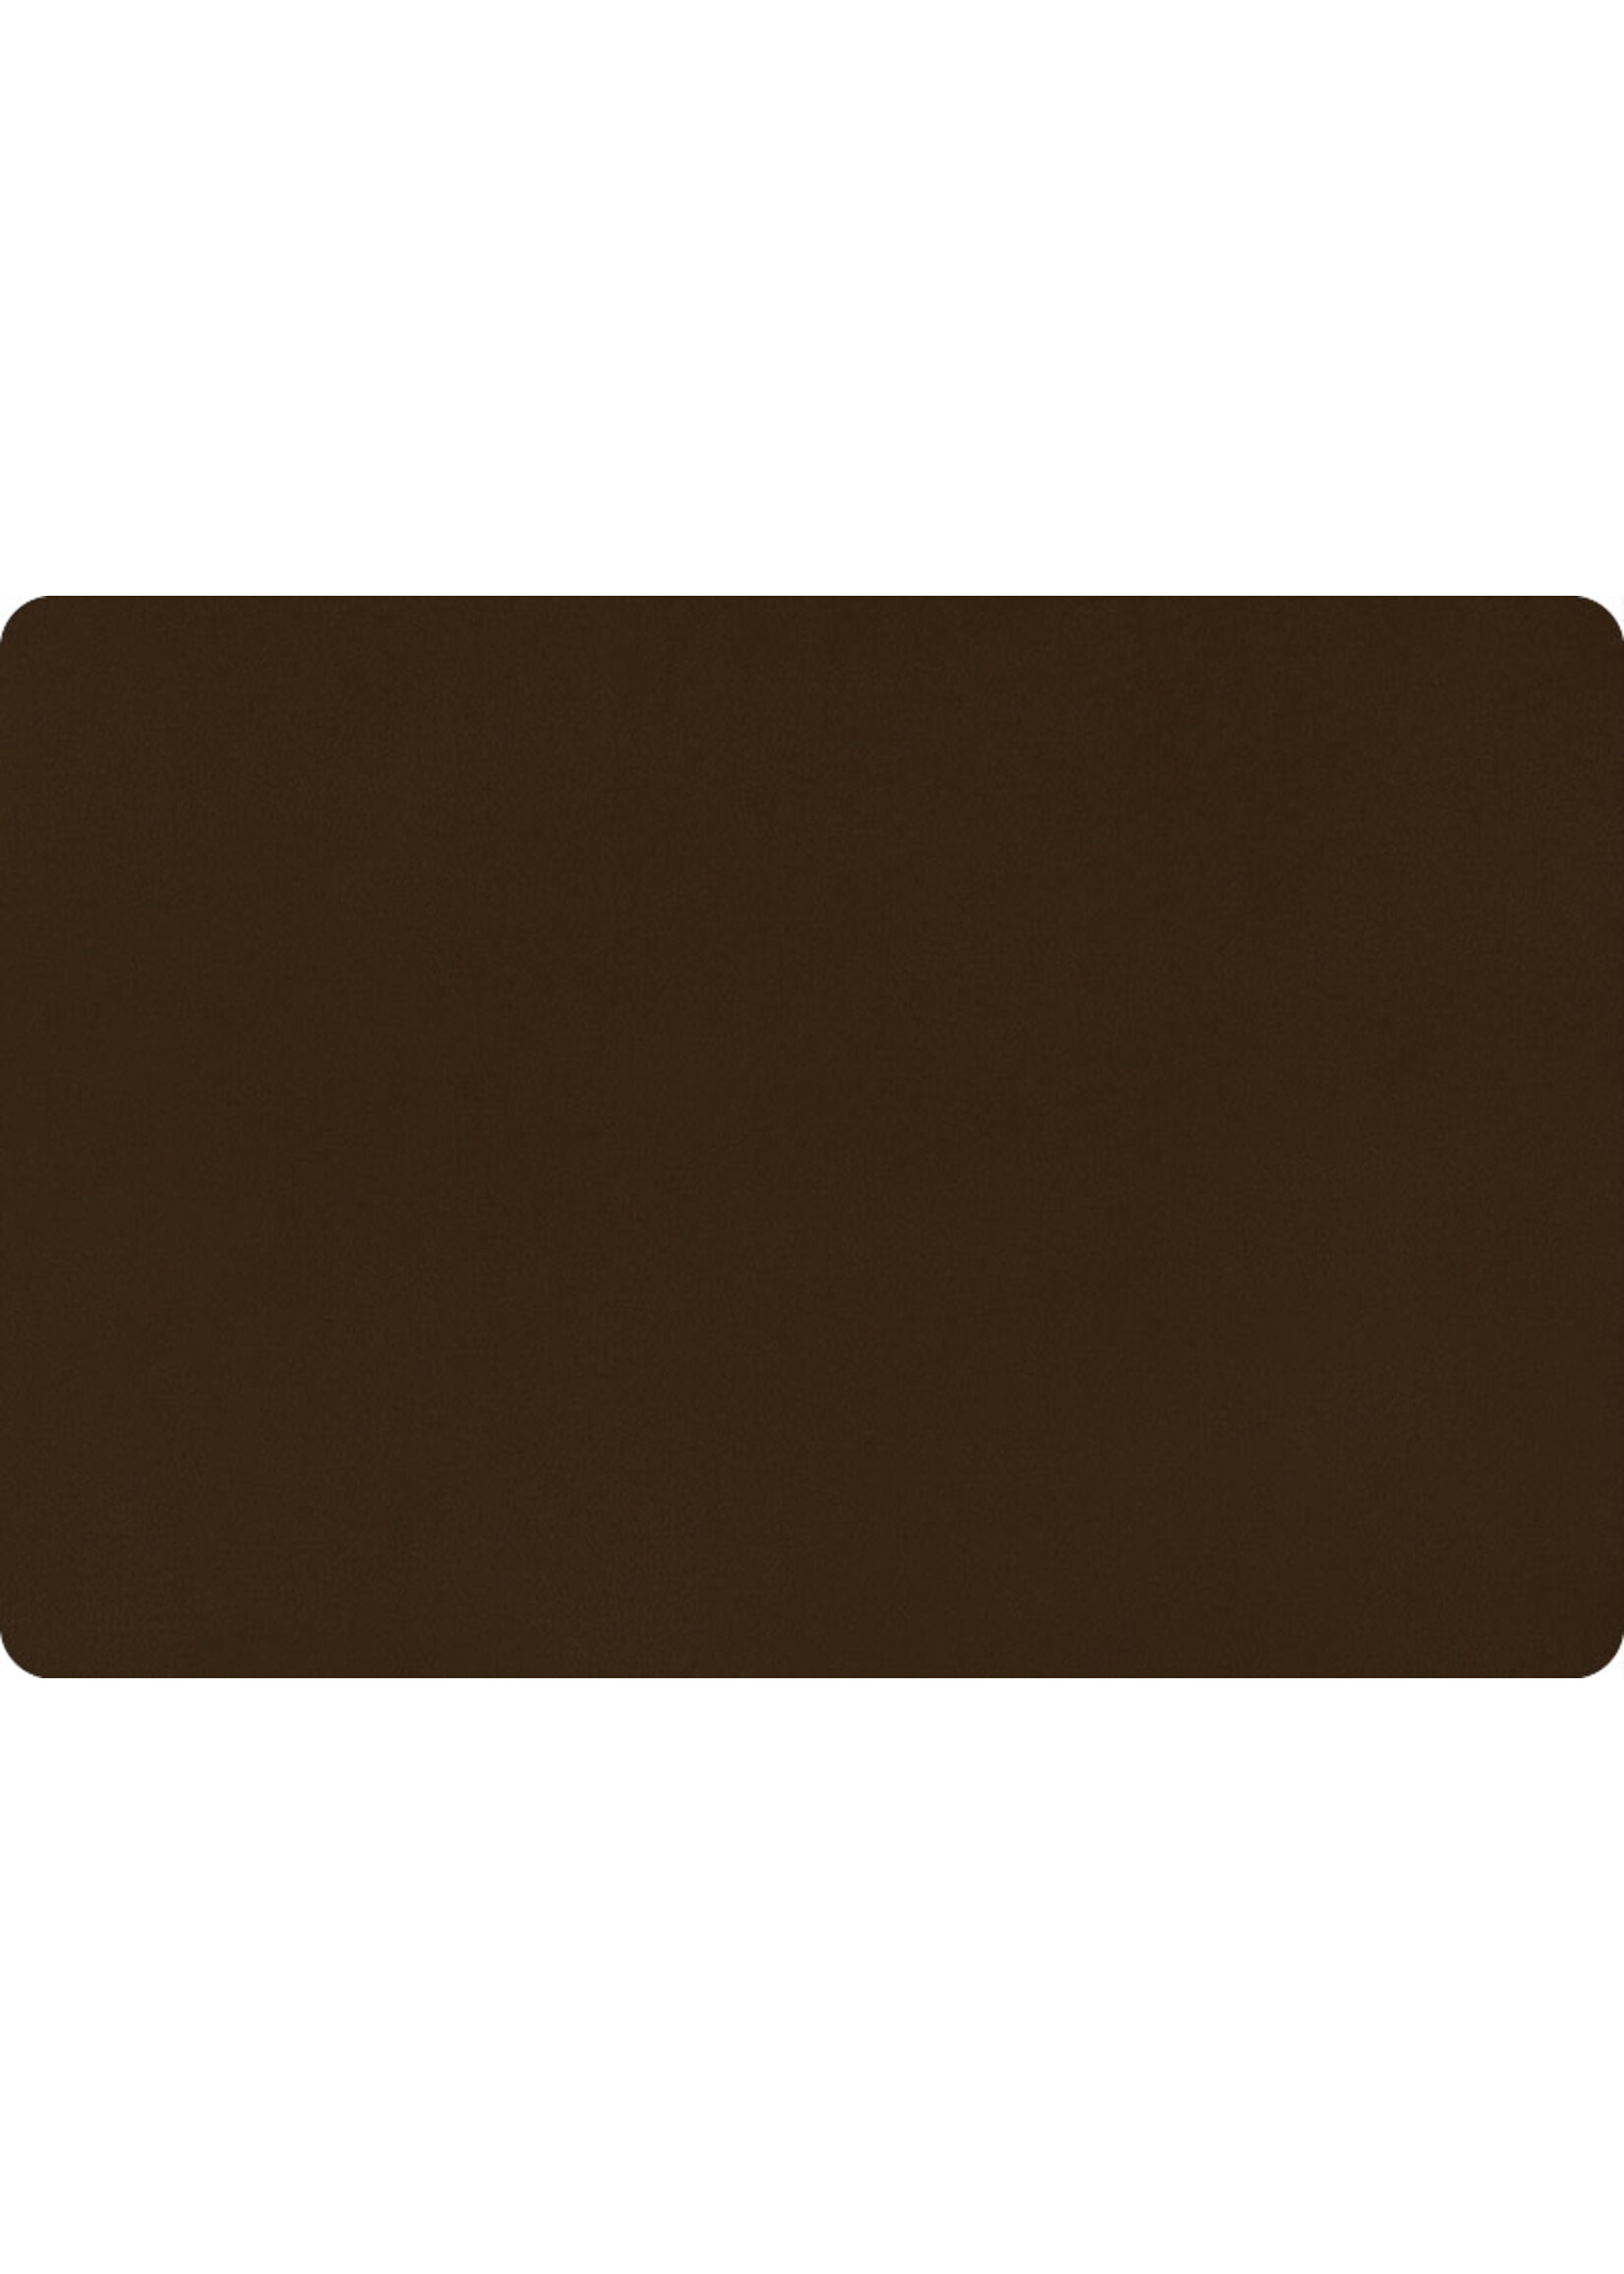 Shannon Fabrics Minky, Extra Wide Solid Cuddle3, 90" Brown, (by the inch)